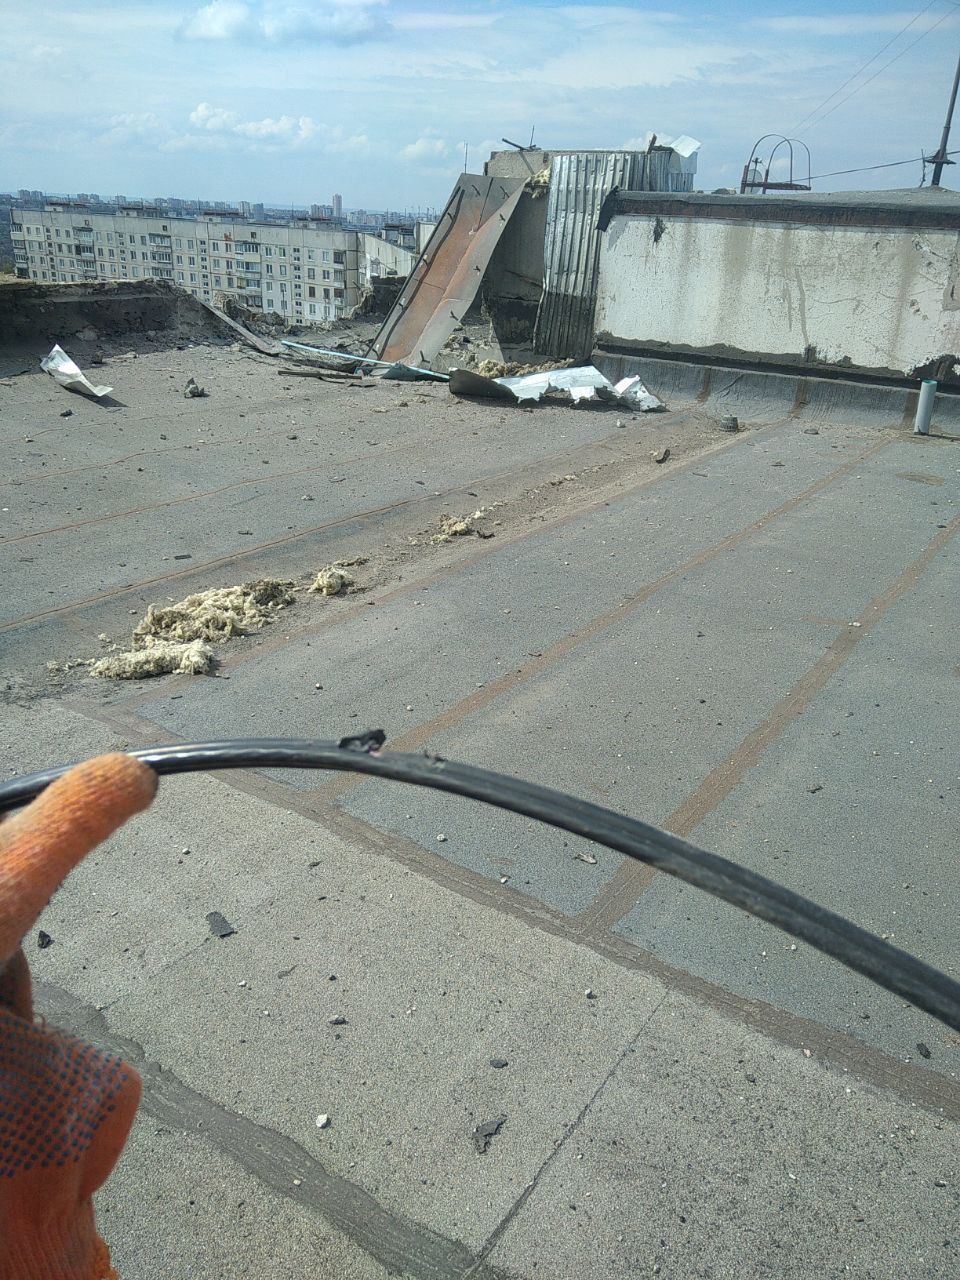 View from a rooftop of a gloved hand holding frayed fiber and showing some destruction on the roof